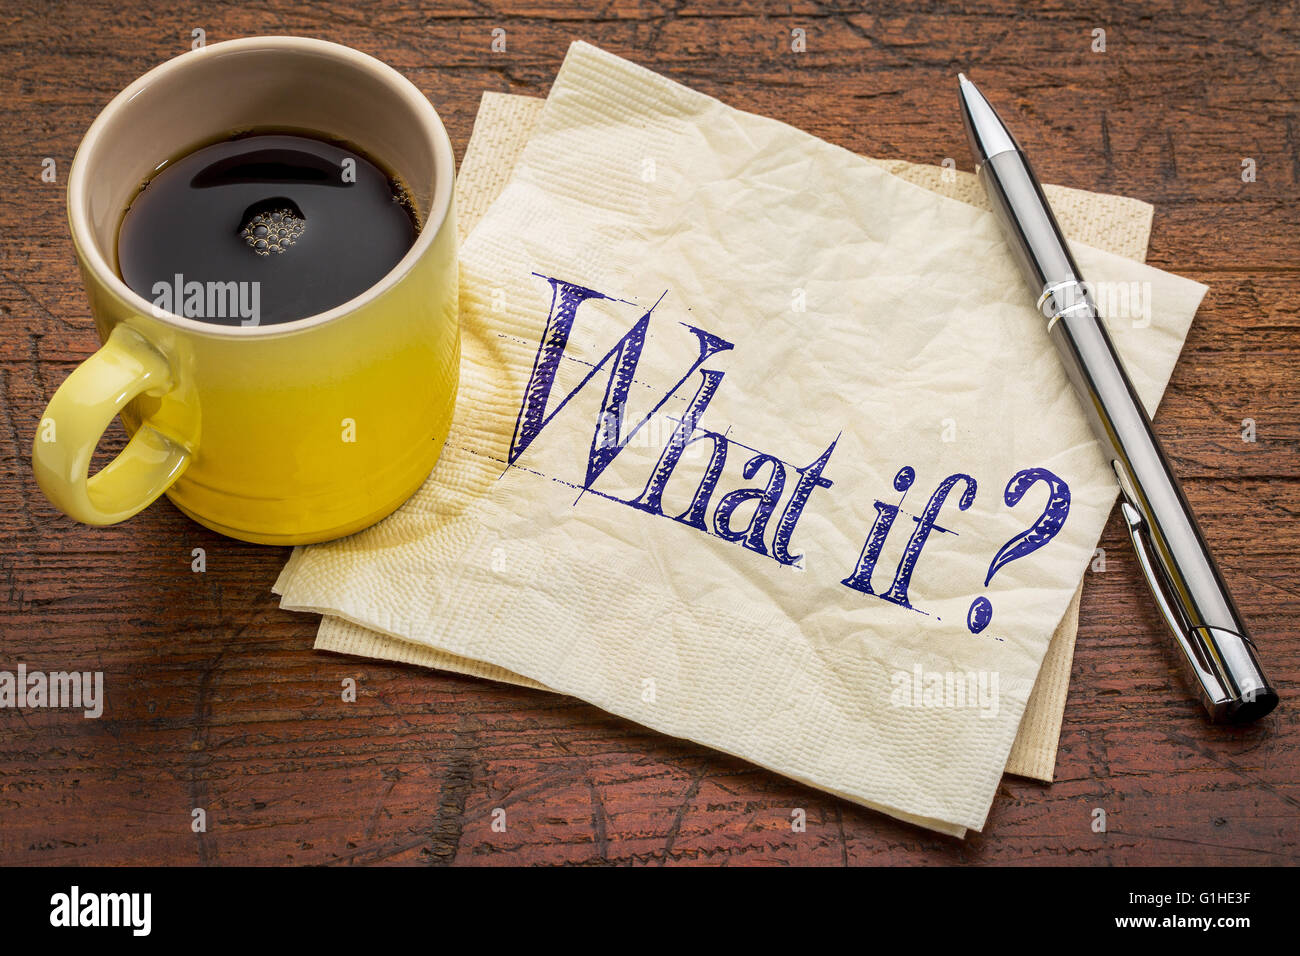 What if question - handwriting on napkin with a yellow cup of espresso coffee against rustic wood Stock Photo